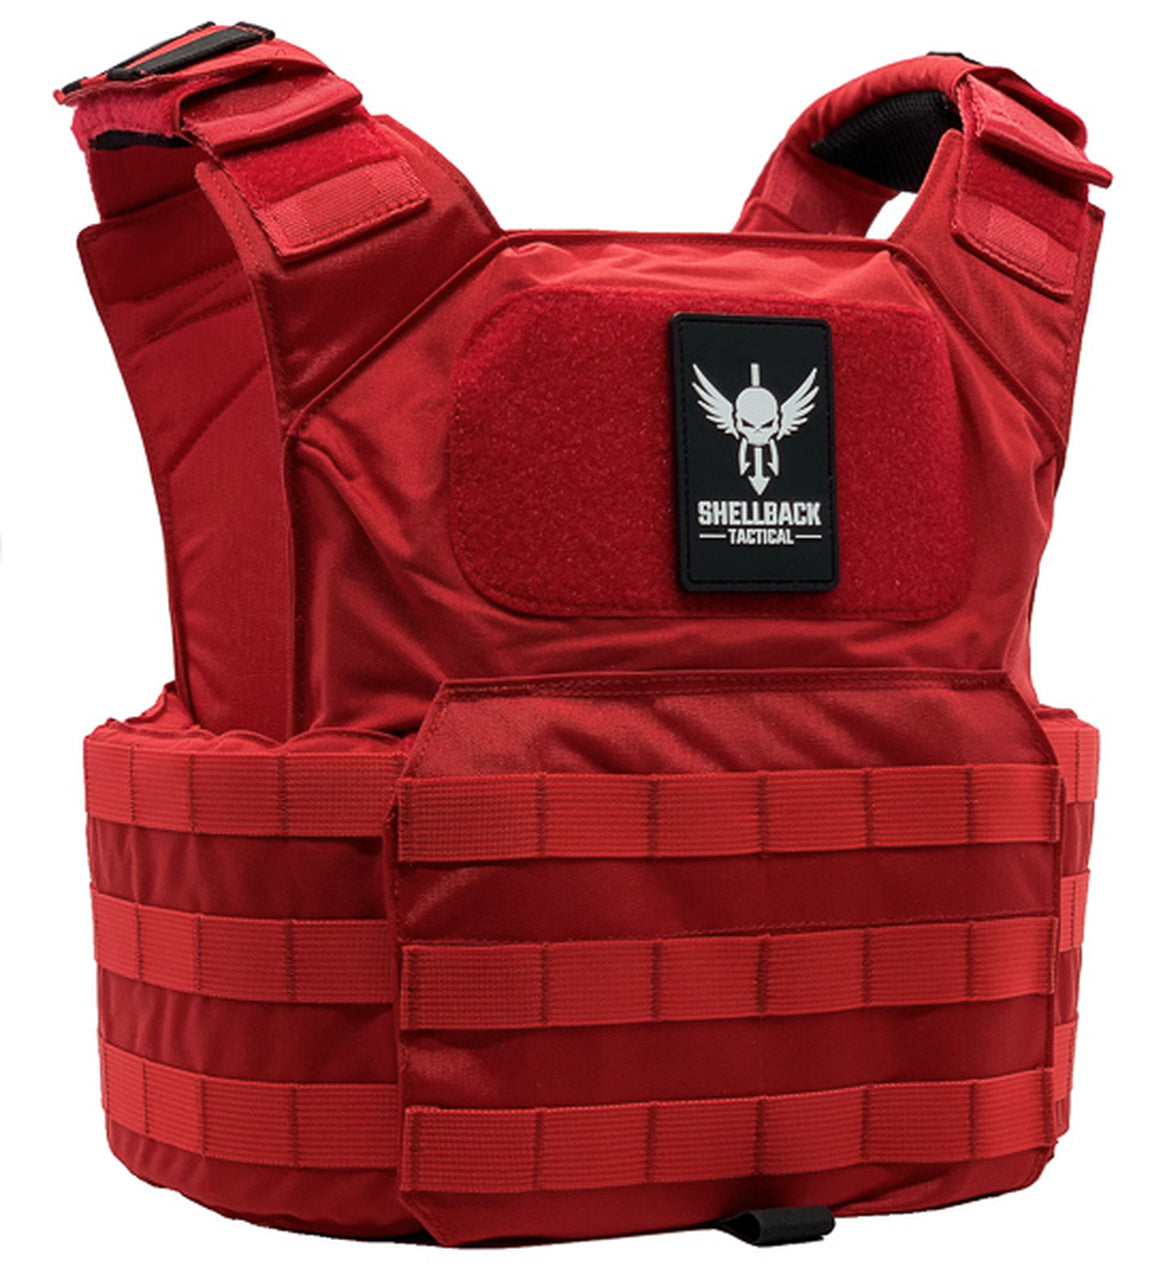 A Shellback Tactical Patriot Plate Carrier with a black logo on it.